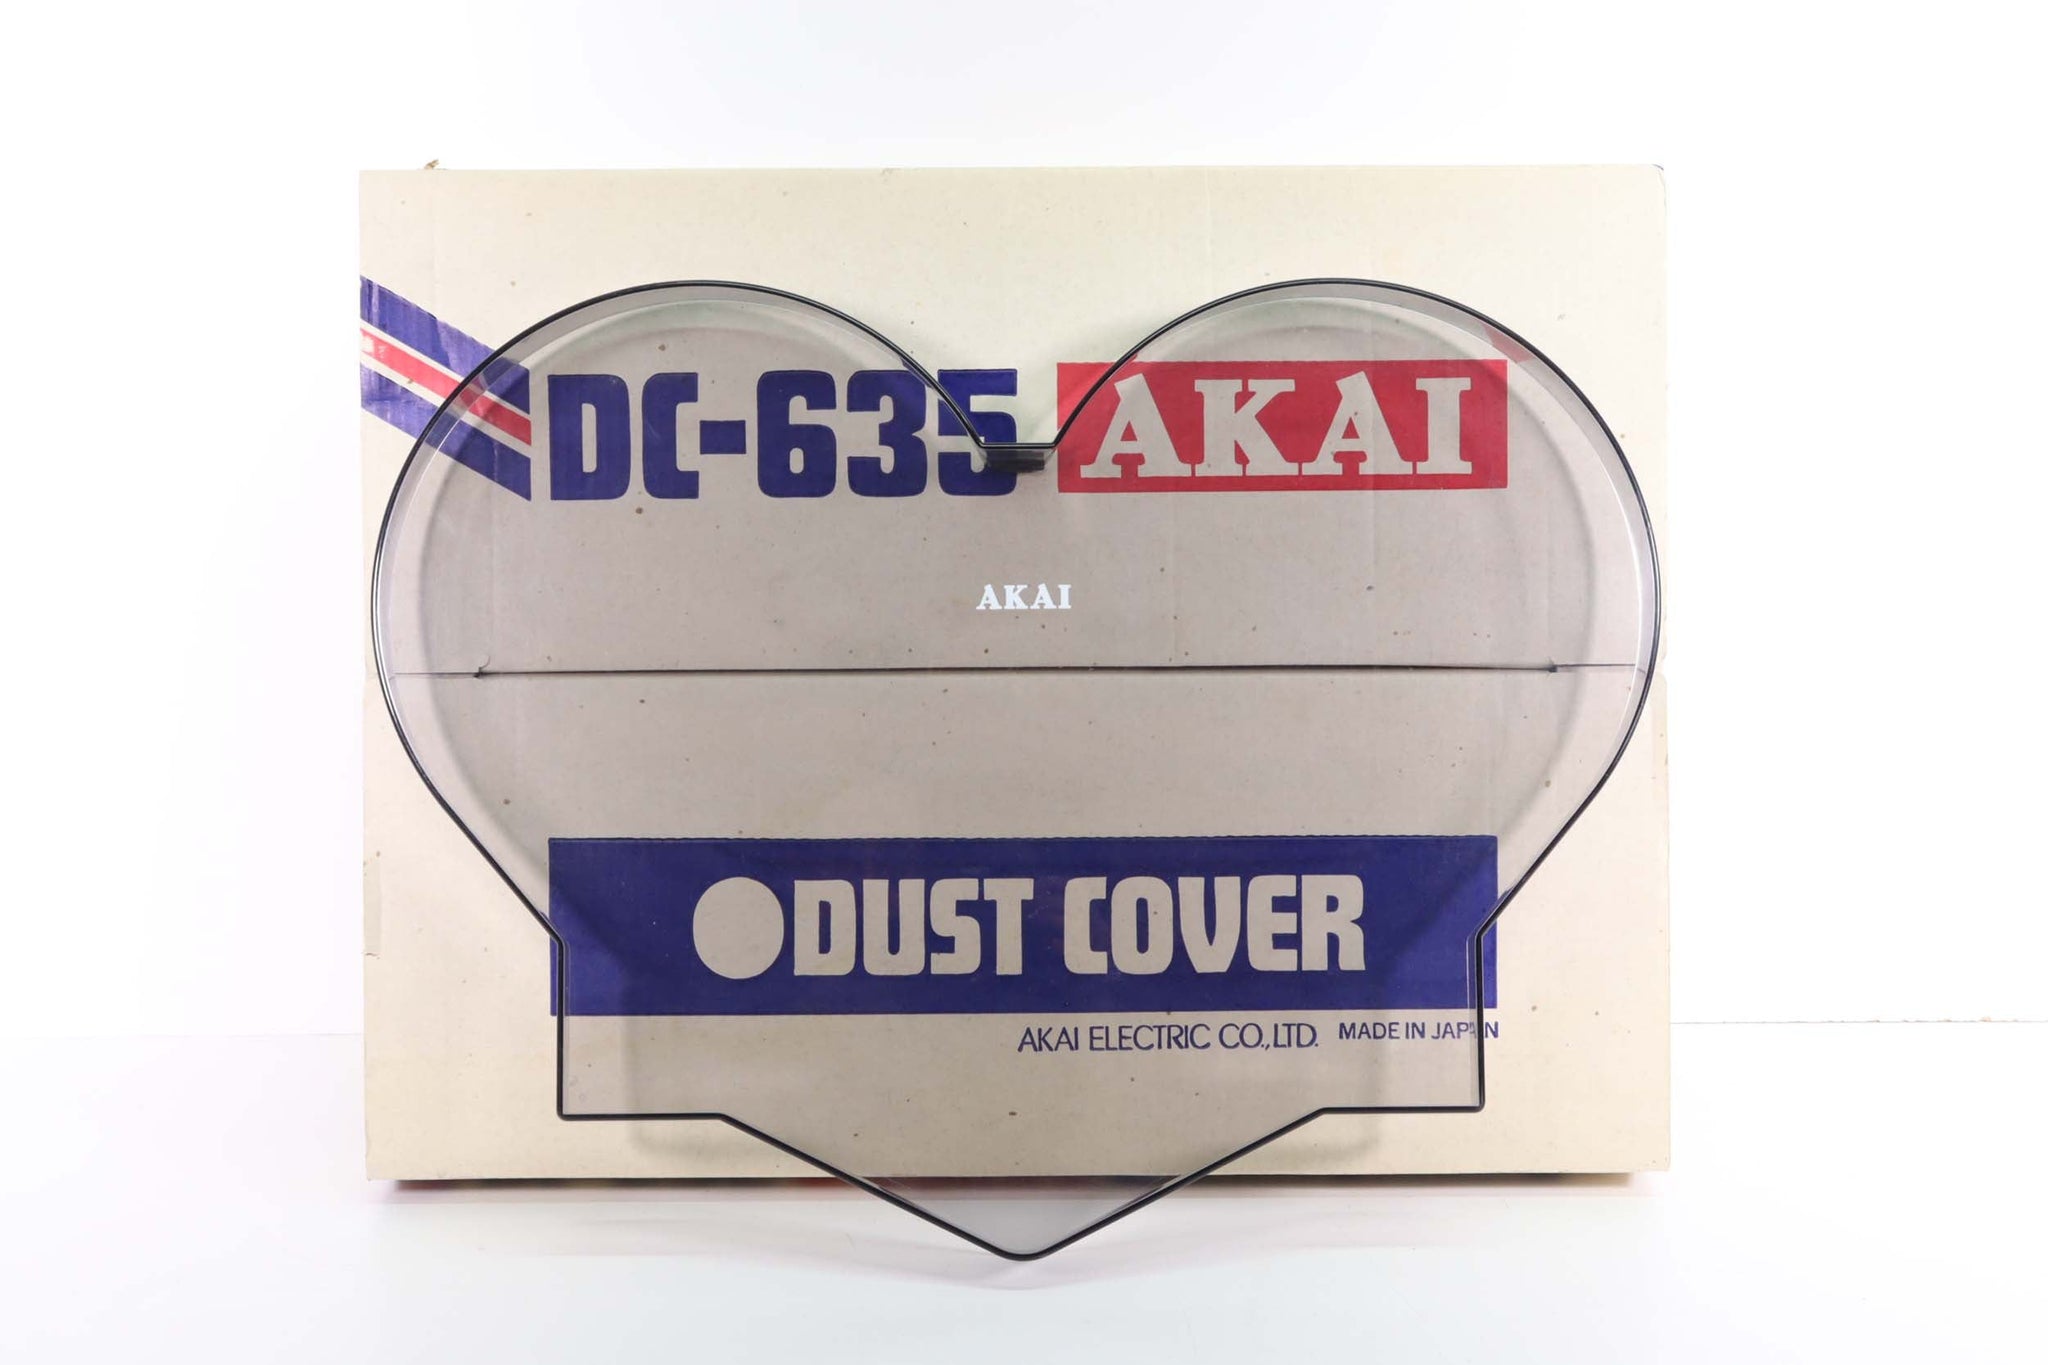 https://spencertified.com/cdn/shop/files/Akai-DC-635-Dust-Cover-for-Reel-To-Reel-Deck-GX-635-and-More-with-Original-Box-Reel-to-Reel-Accessories_2048x2048.jpg?v=1689627154